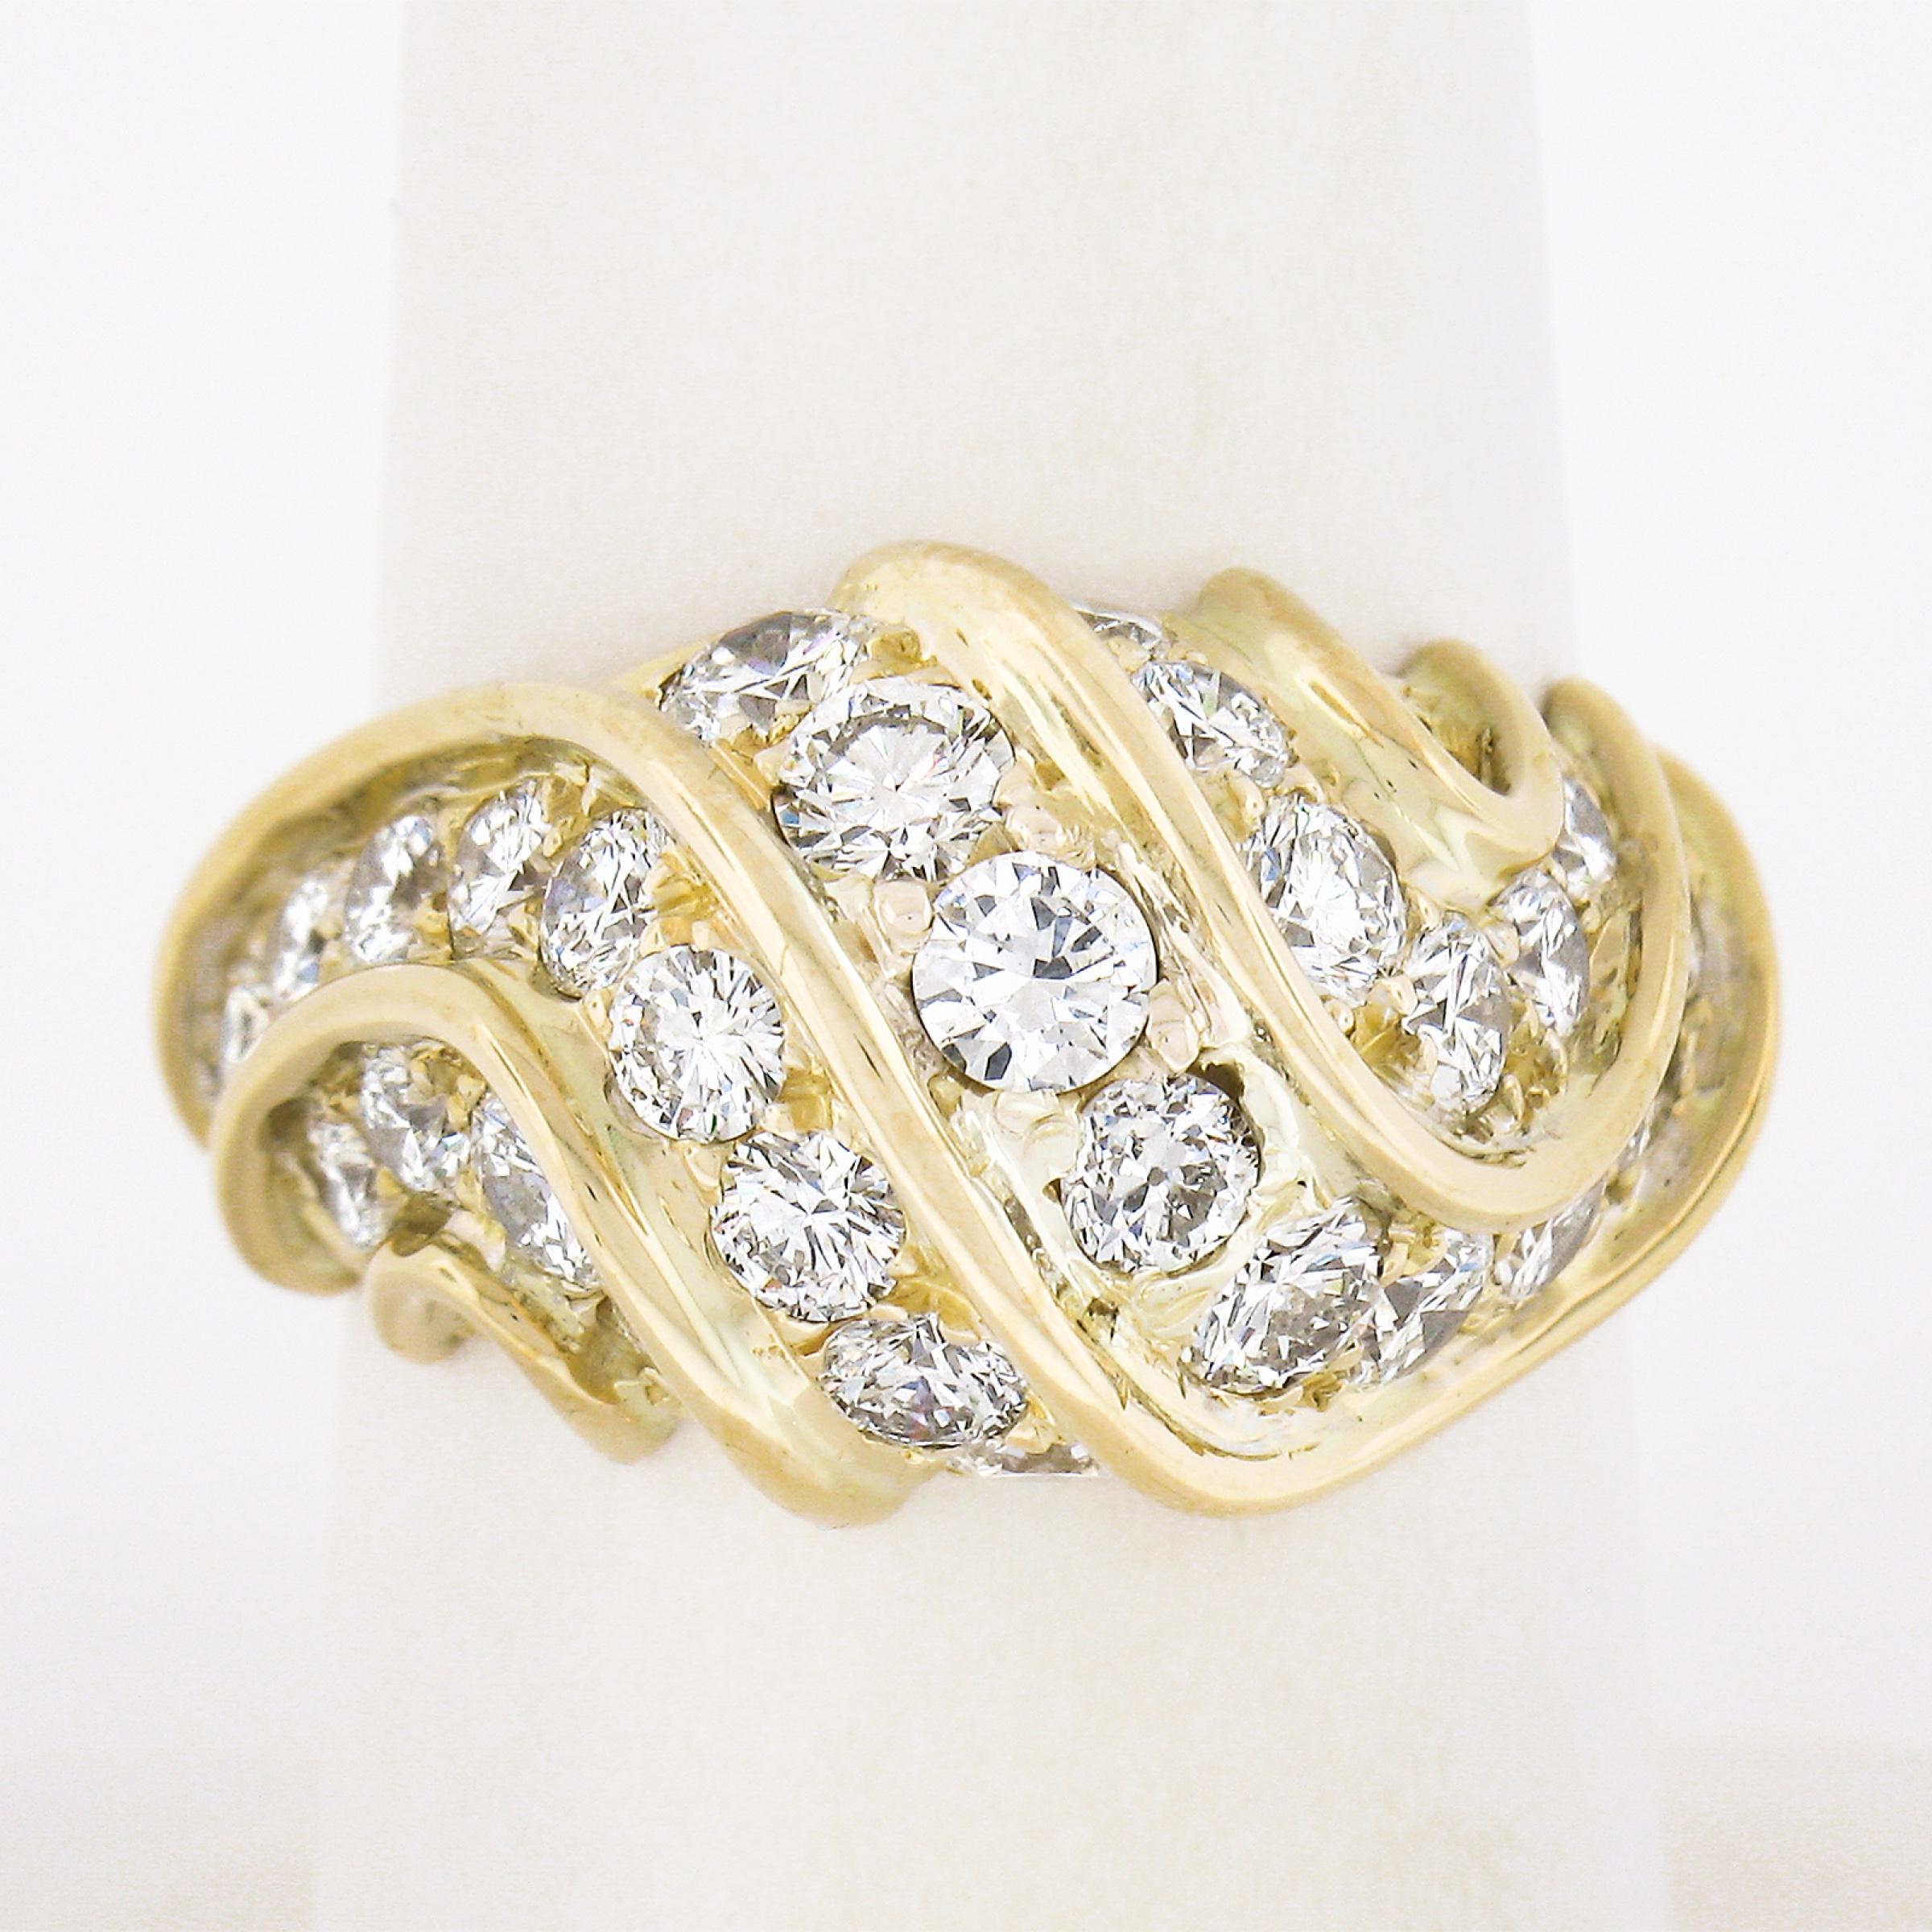 This truly magnificent bombe ring is crafted in solid 18k gold and features approximately 3.35 carats of large and fiery round brilliant cut diamonds. The diamonds are carefully pave set in between raised gold channels that scroll and swirl